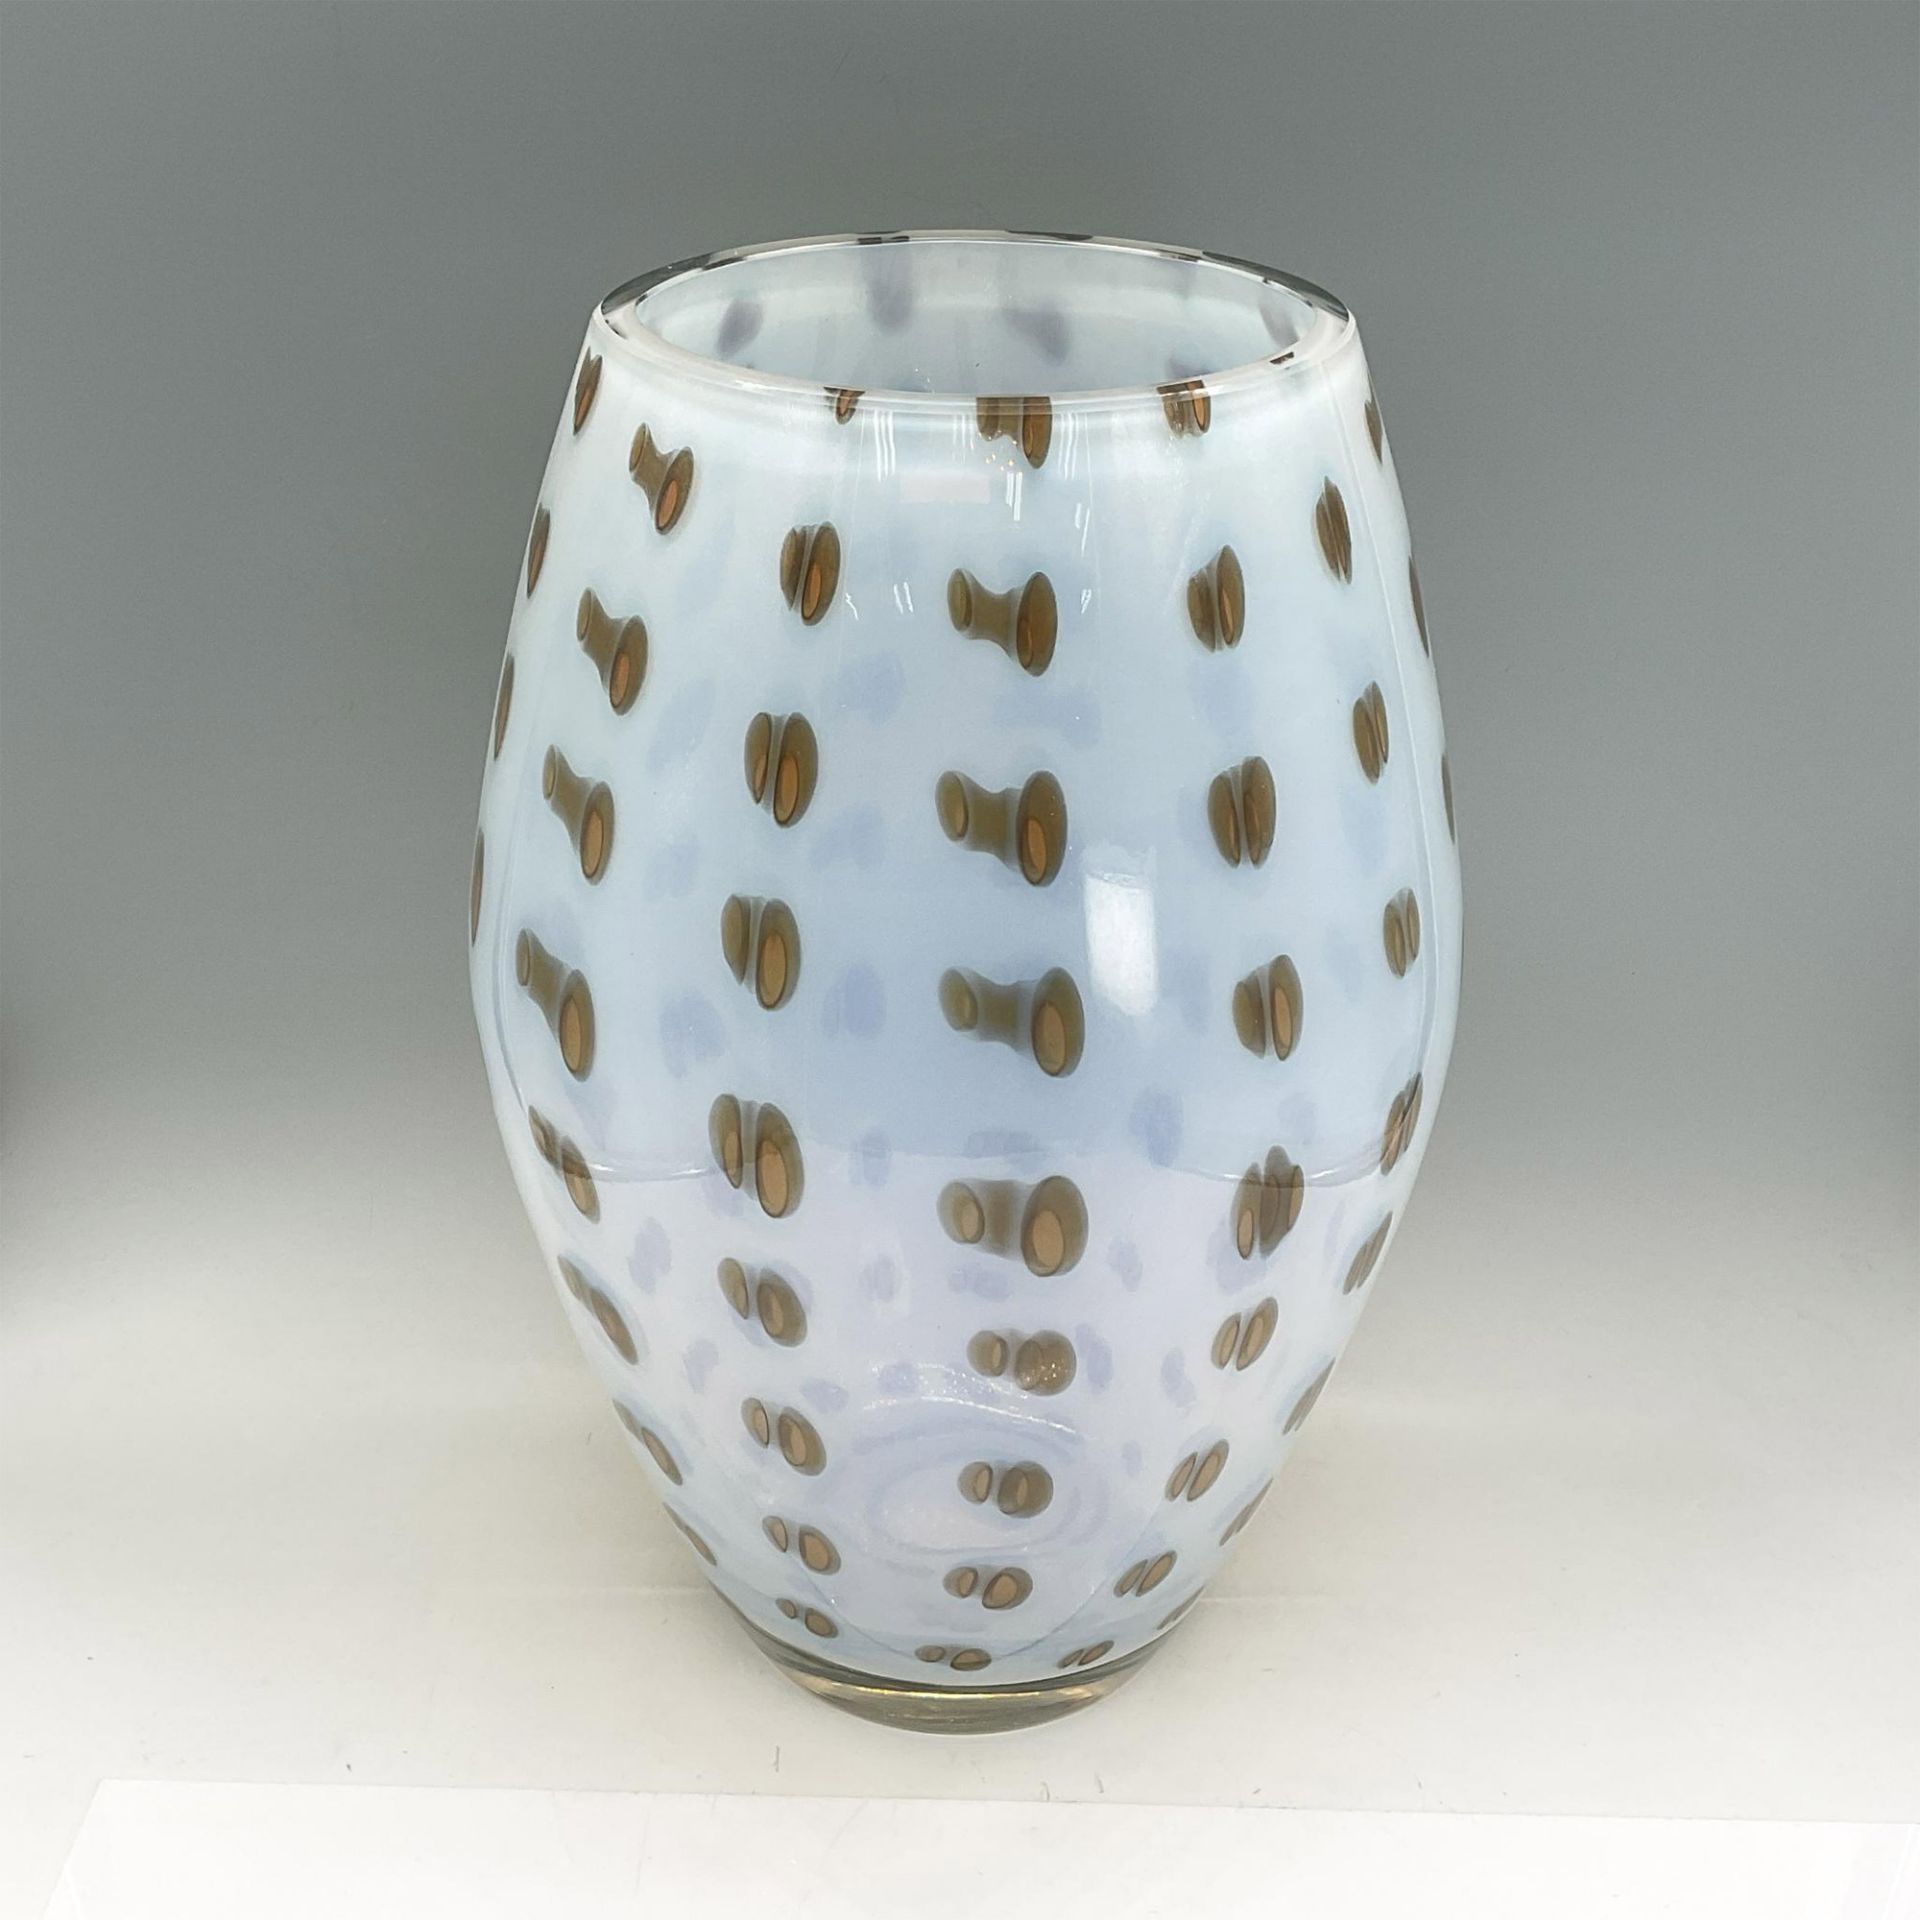 Waterford Evolution Crystal Vase, Bamboo Pattern - Image 2 of 3